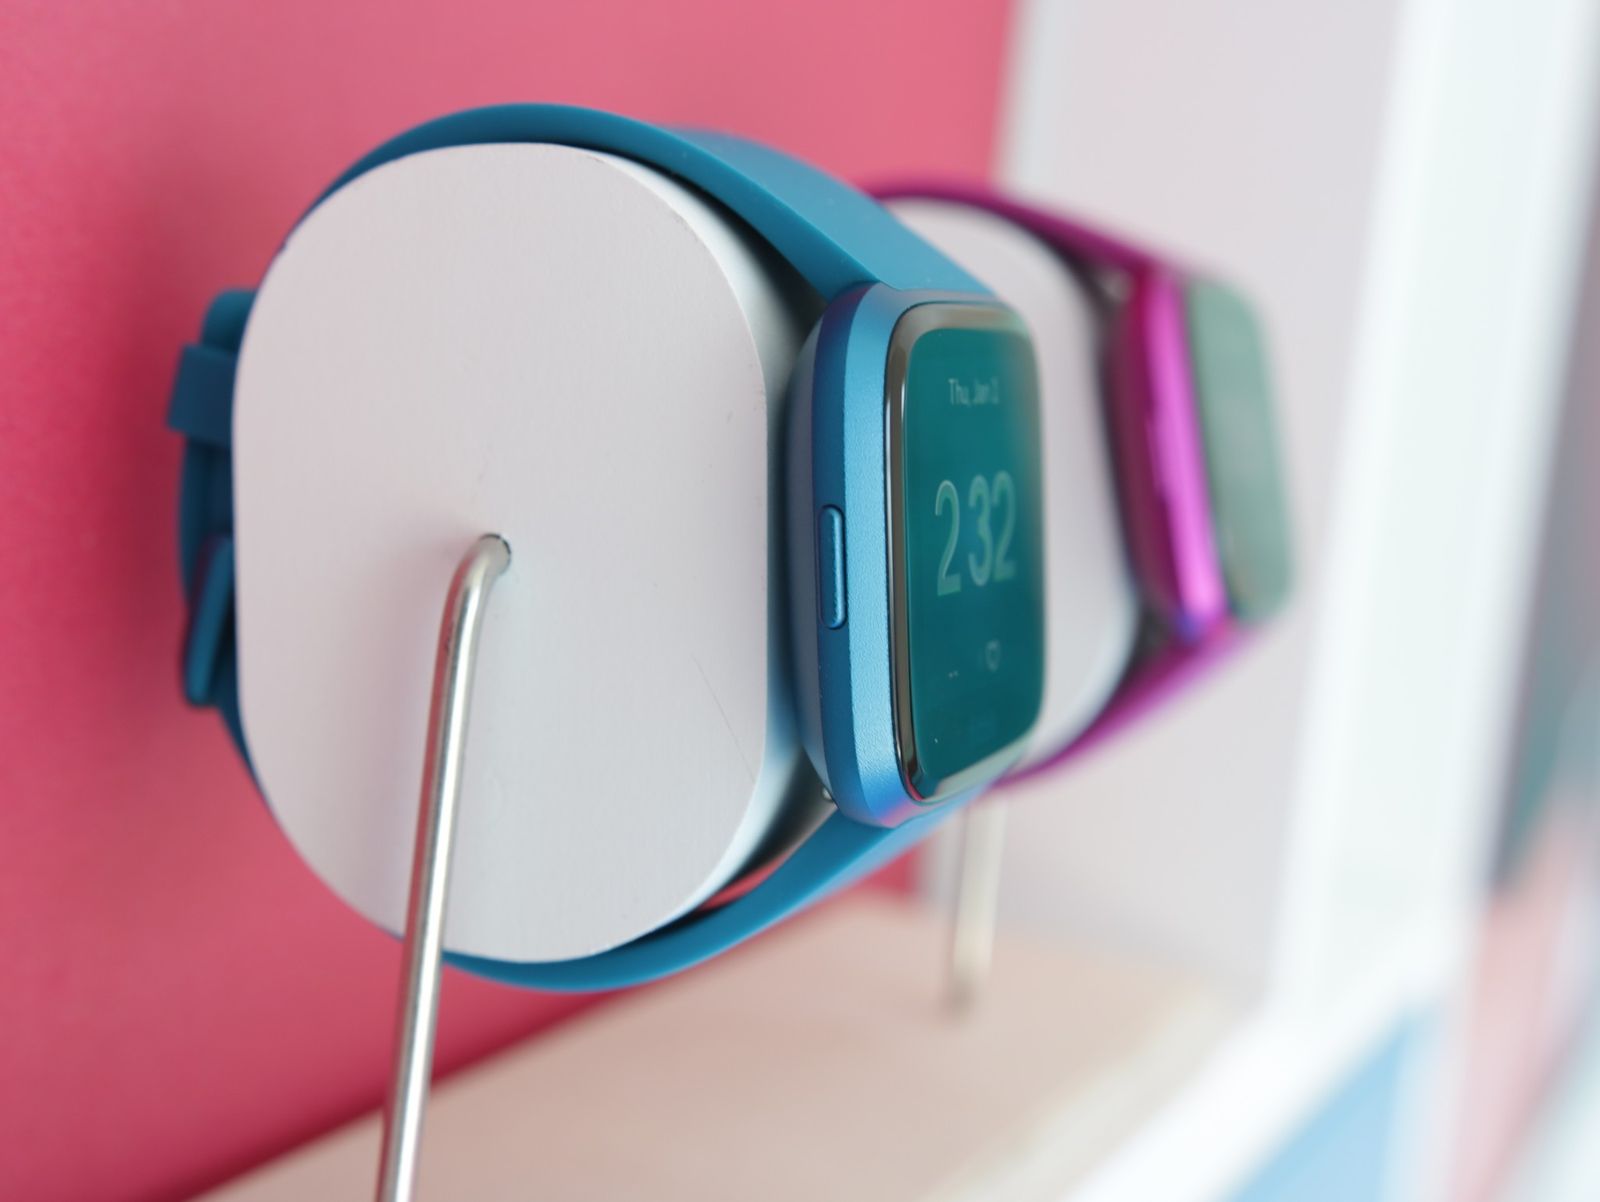 Does the Fitbit Versa Lite support 